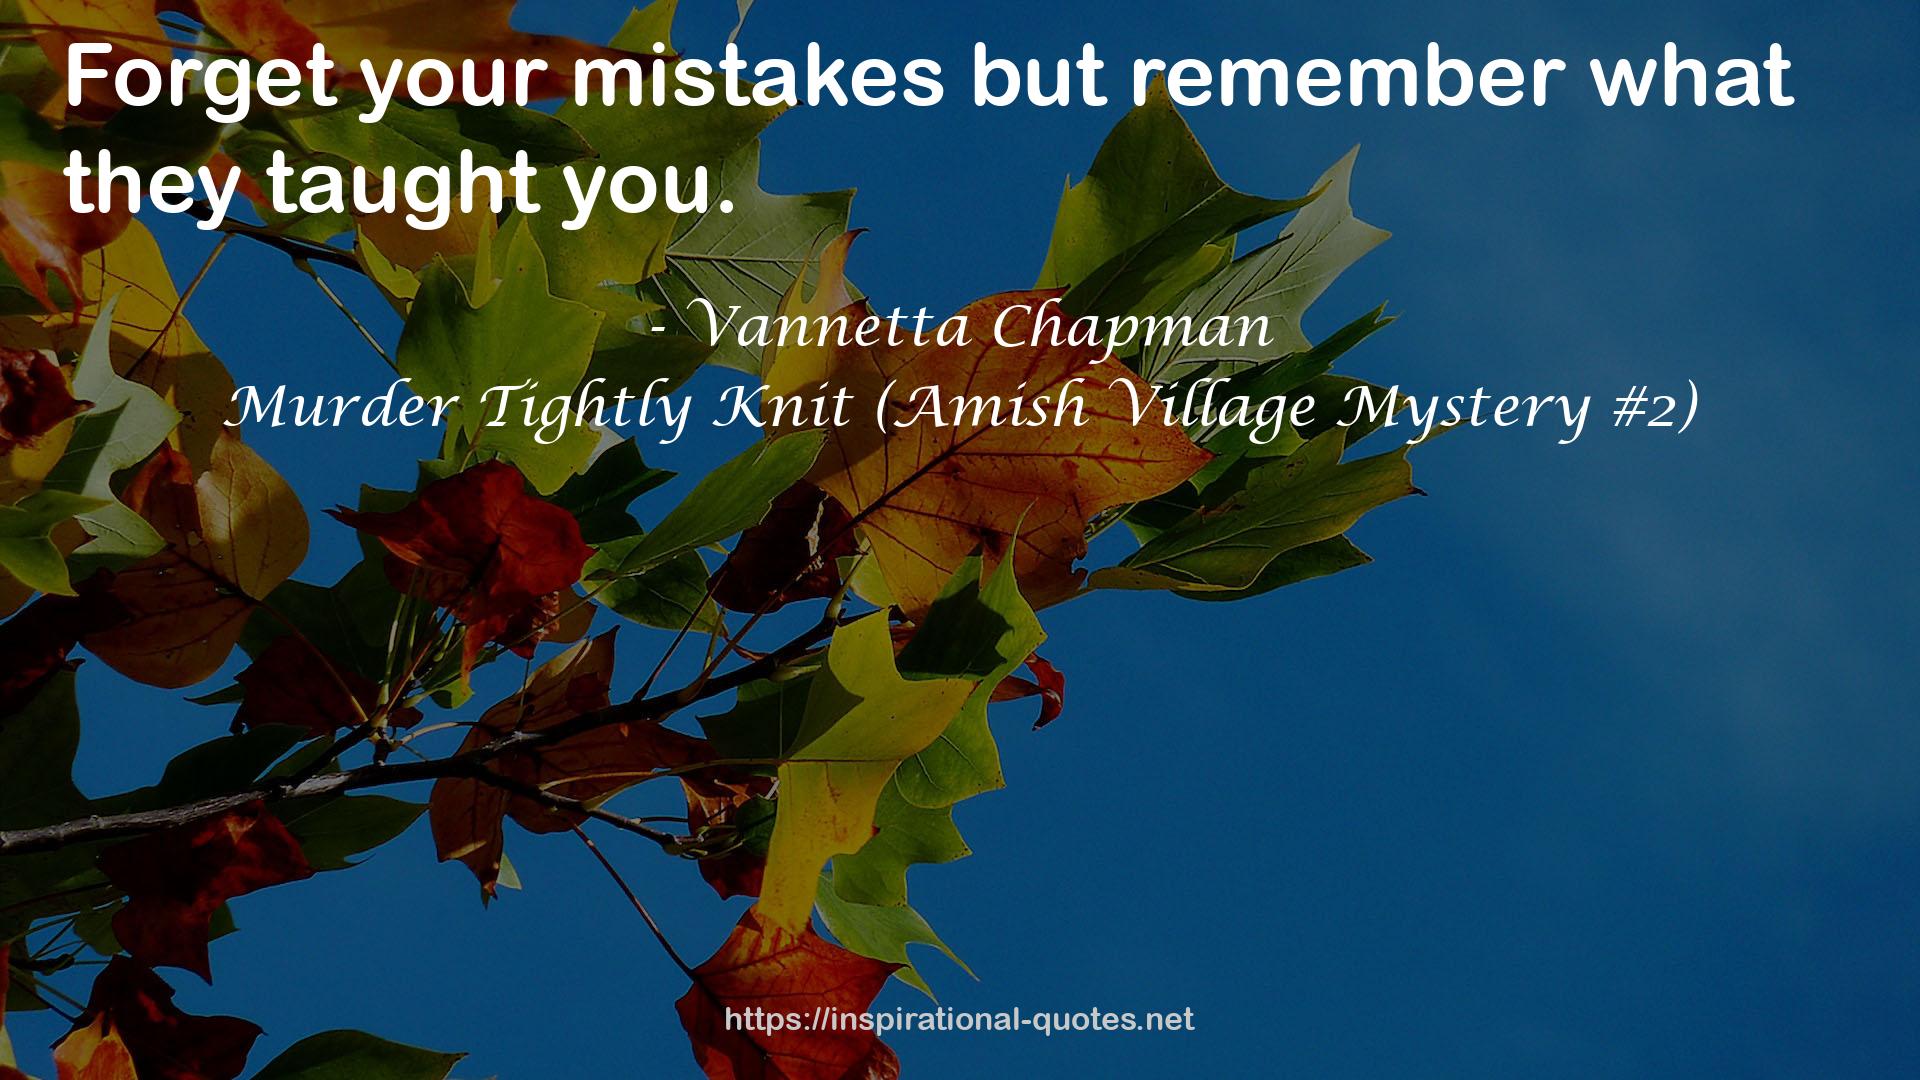 Murder Tightly Knit (Amish Village Mystery #2) QUOTES